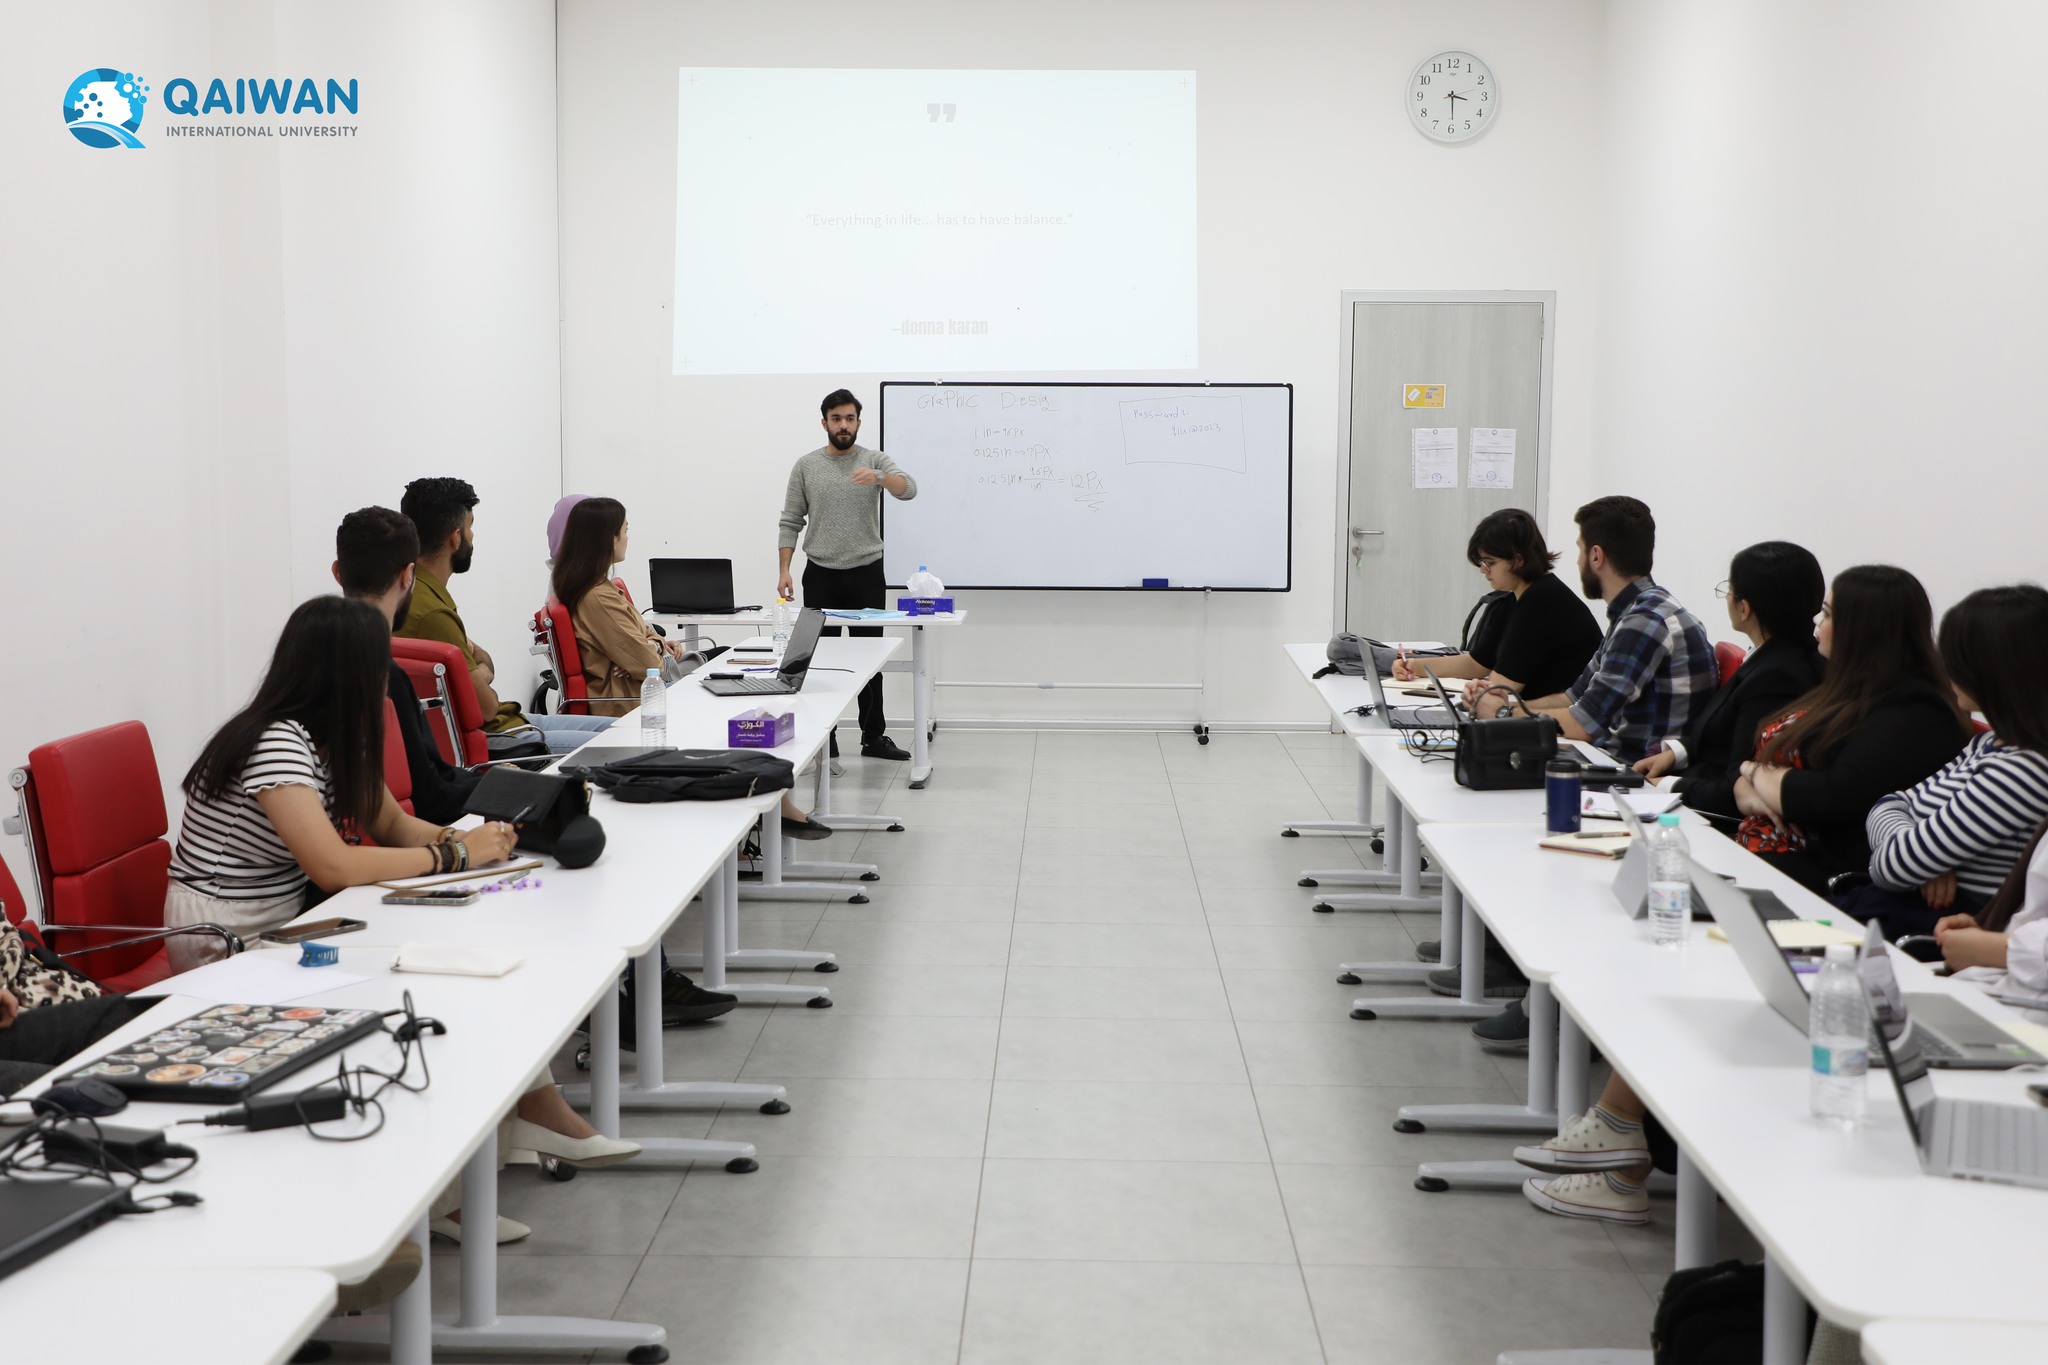 The Technology Club of QIU organized a graphic design course